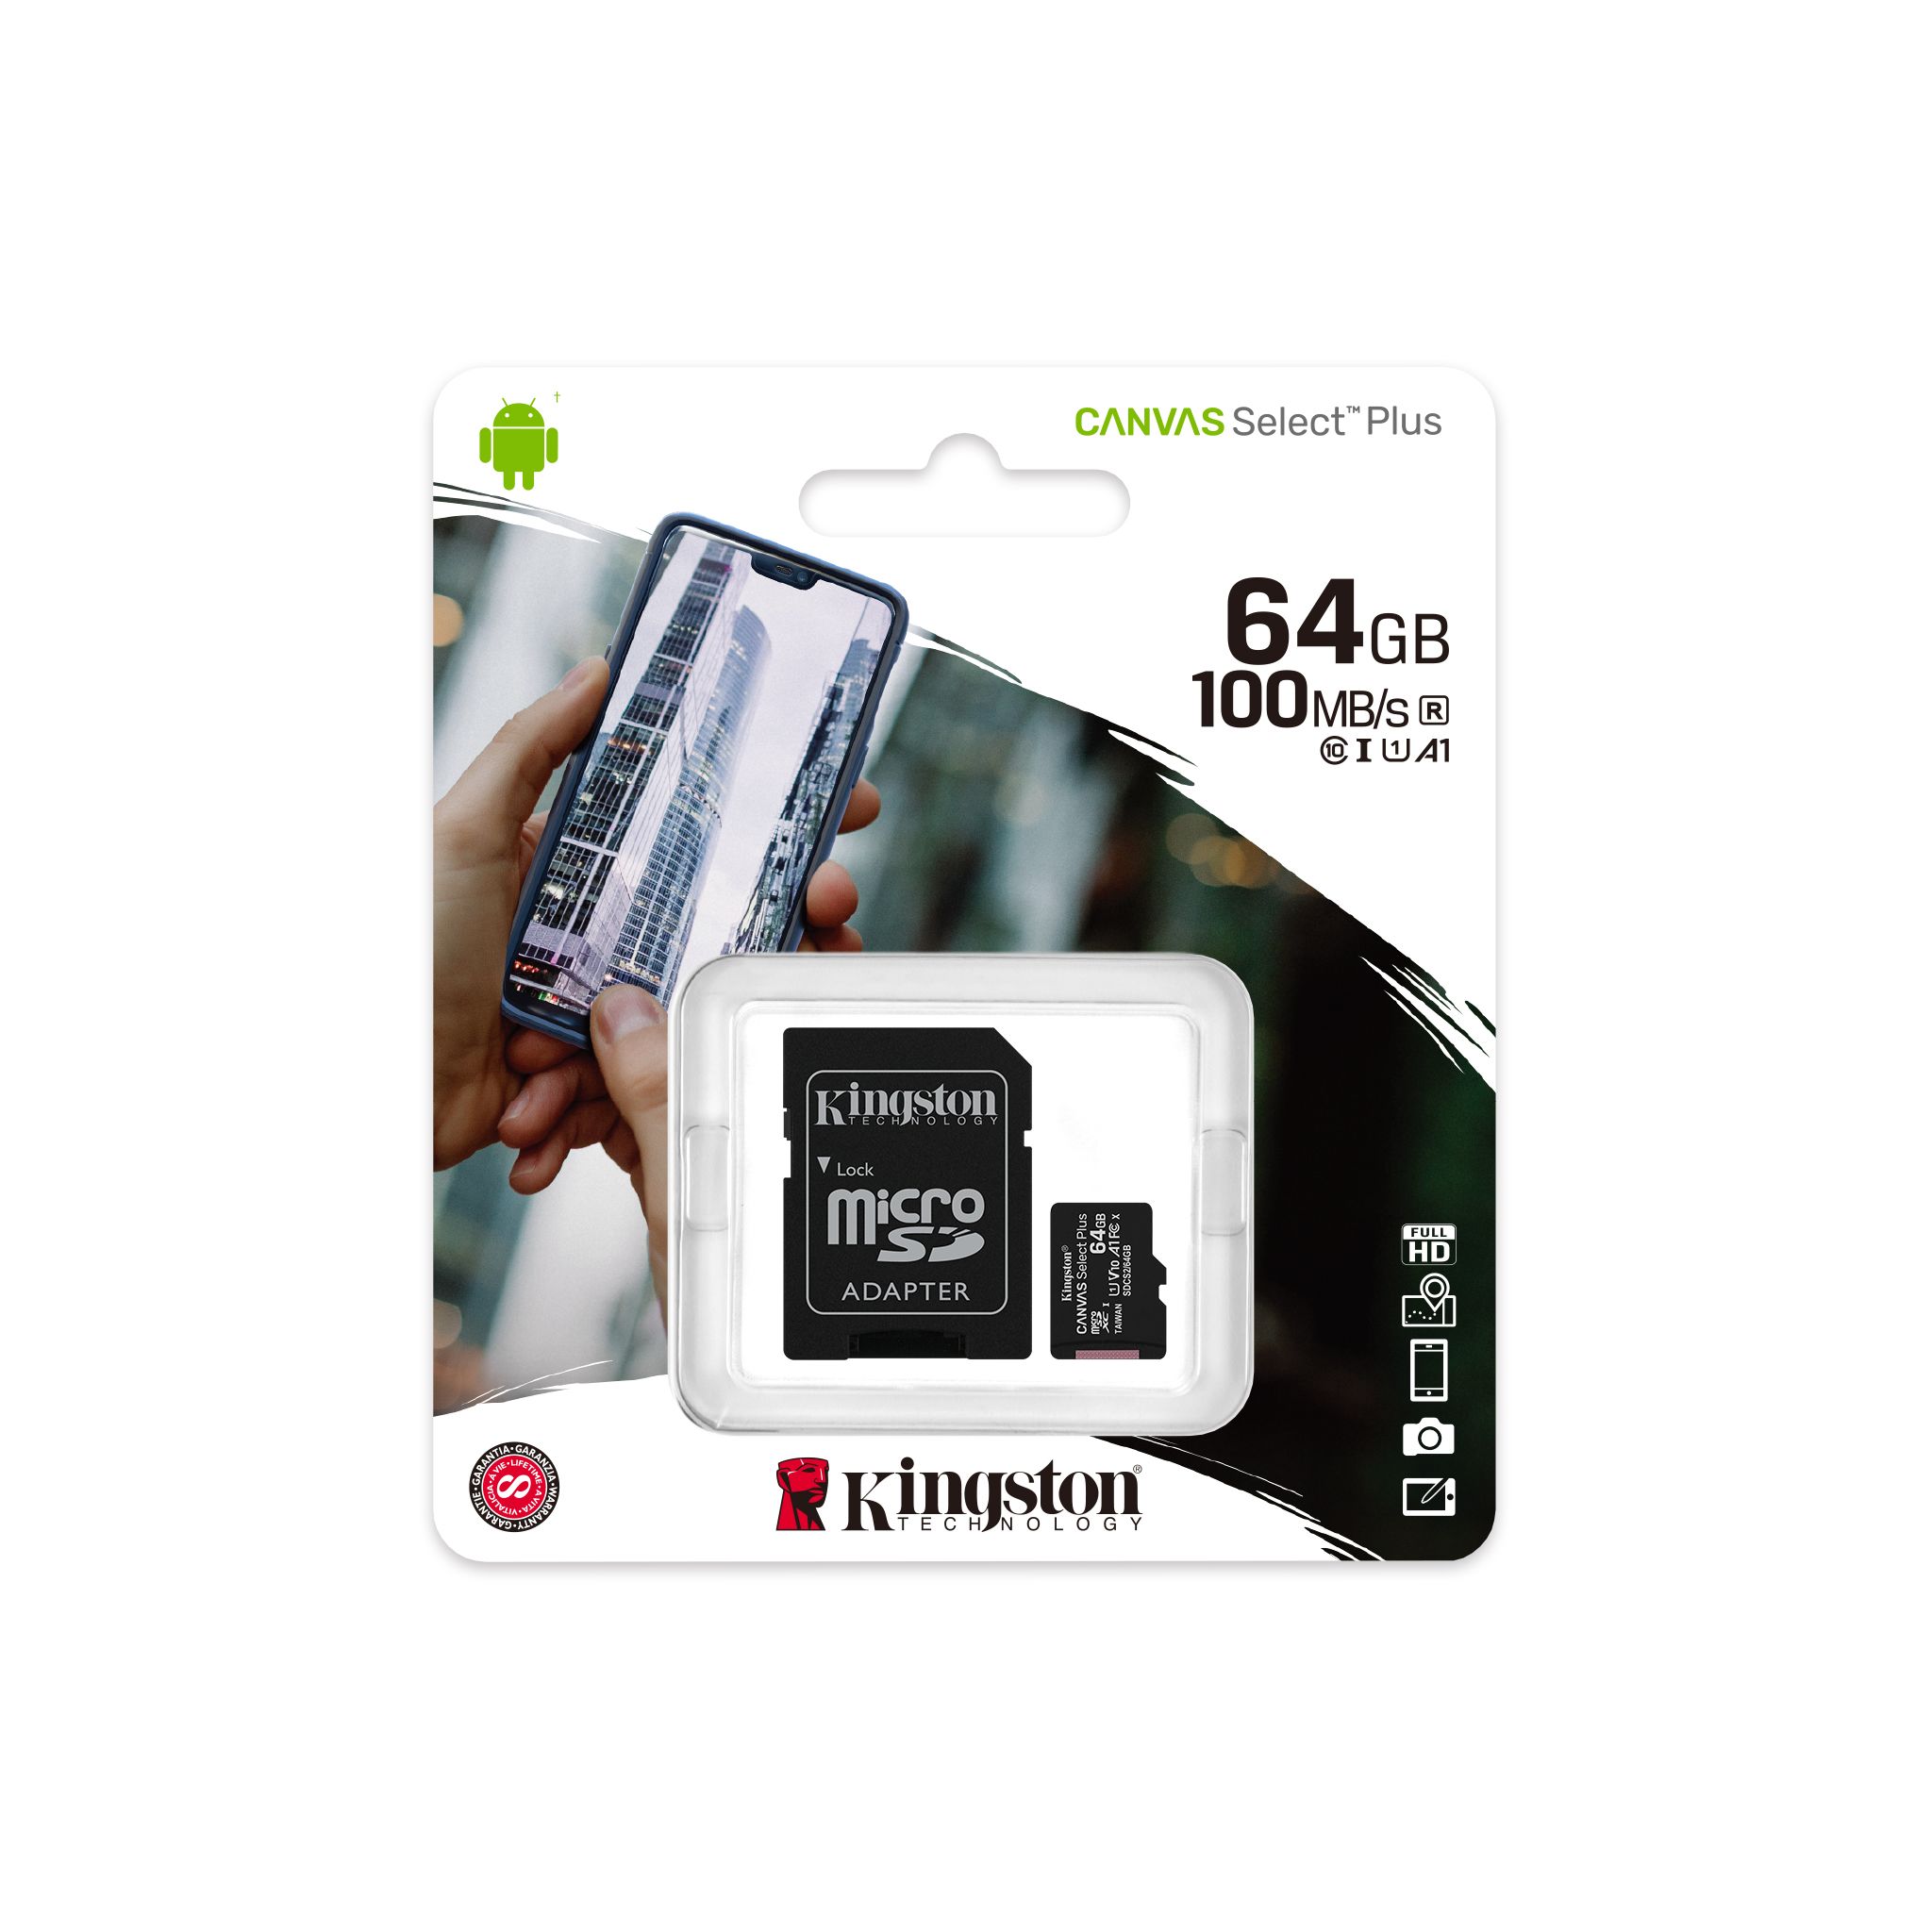 100MBs Works with Kingston Kingston 64GB ZTE Tempo MicroSDXC Canvas Select Plus Card Verified by SanFlash. 